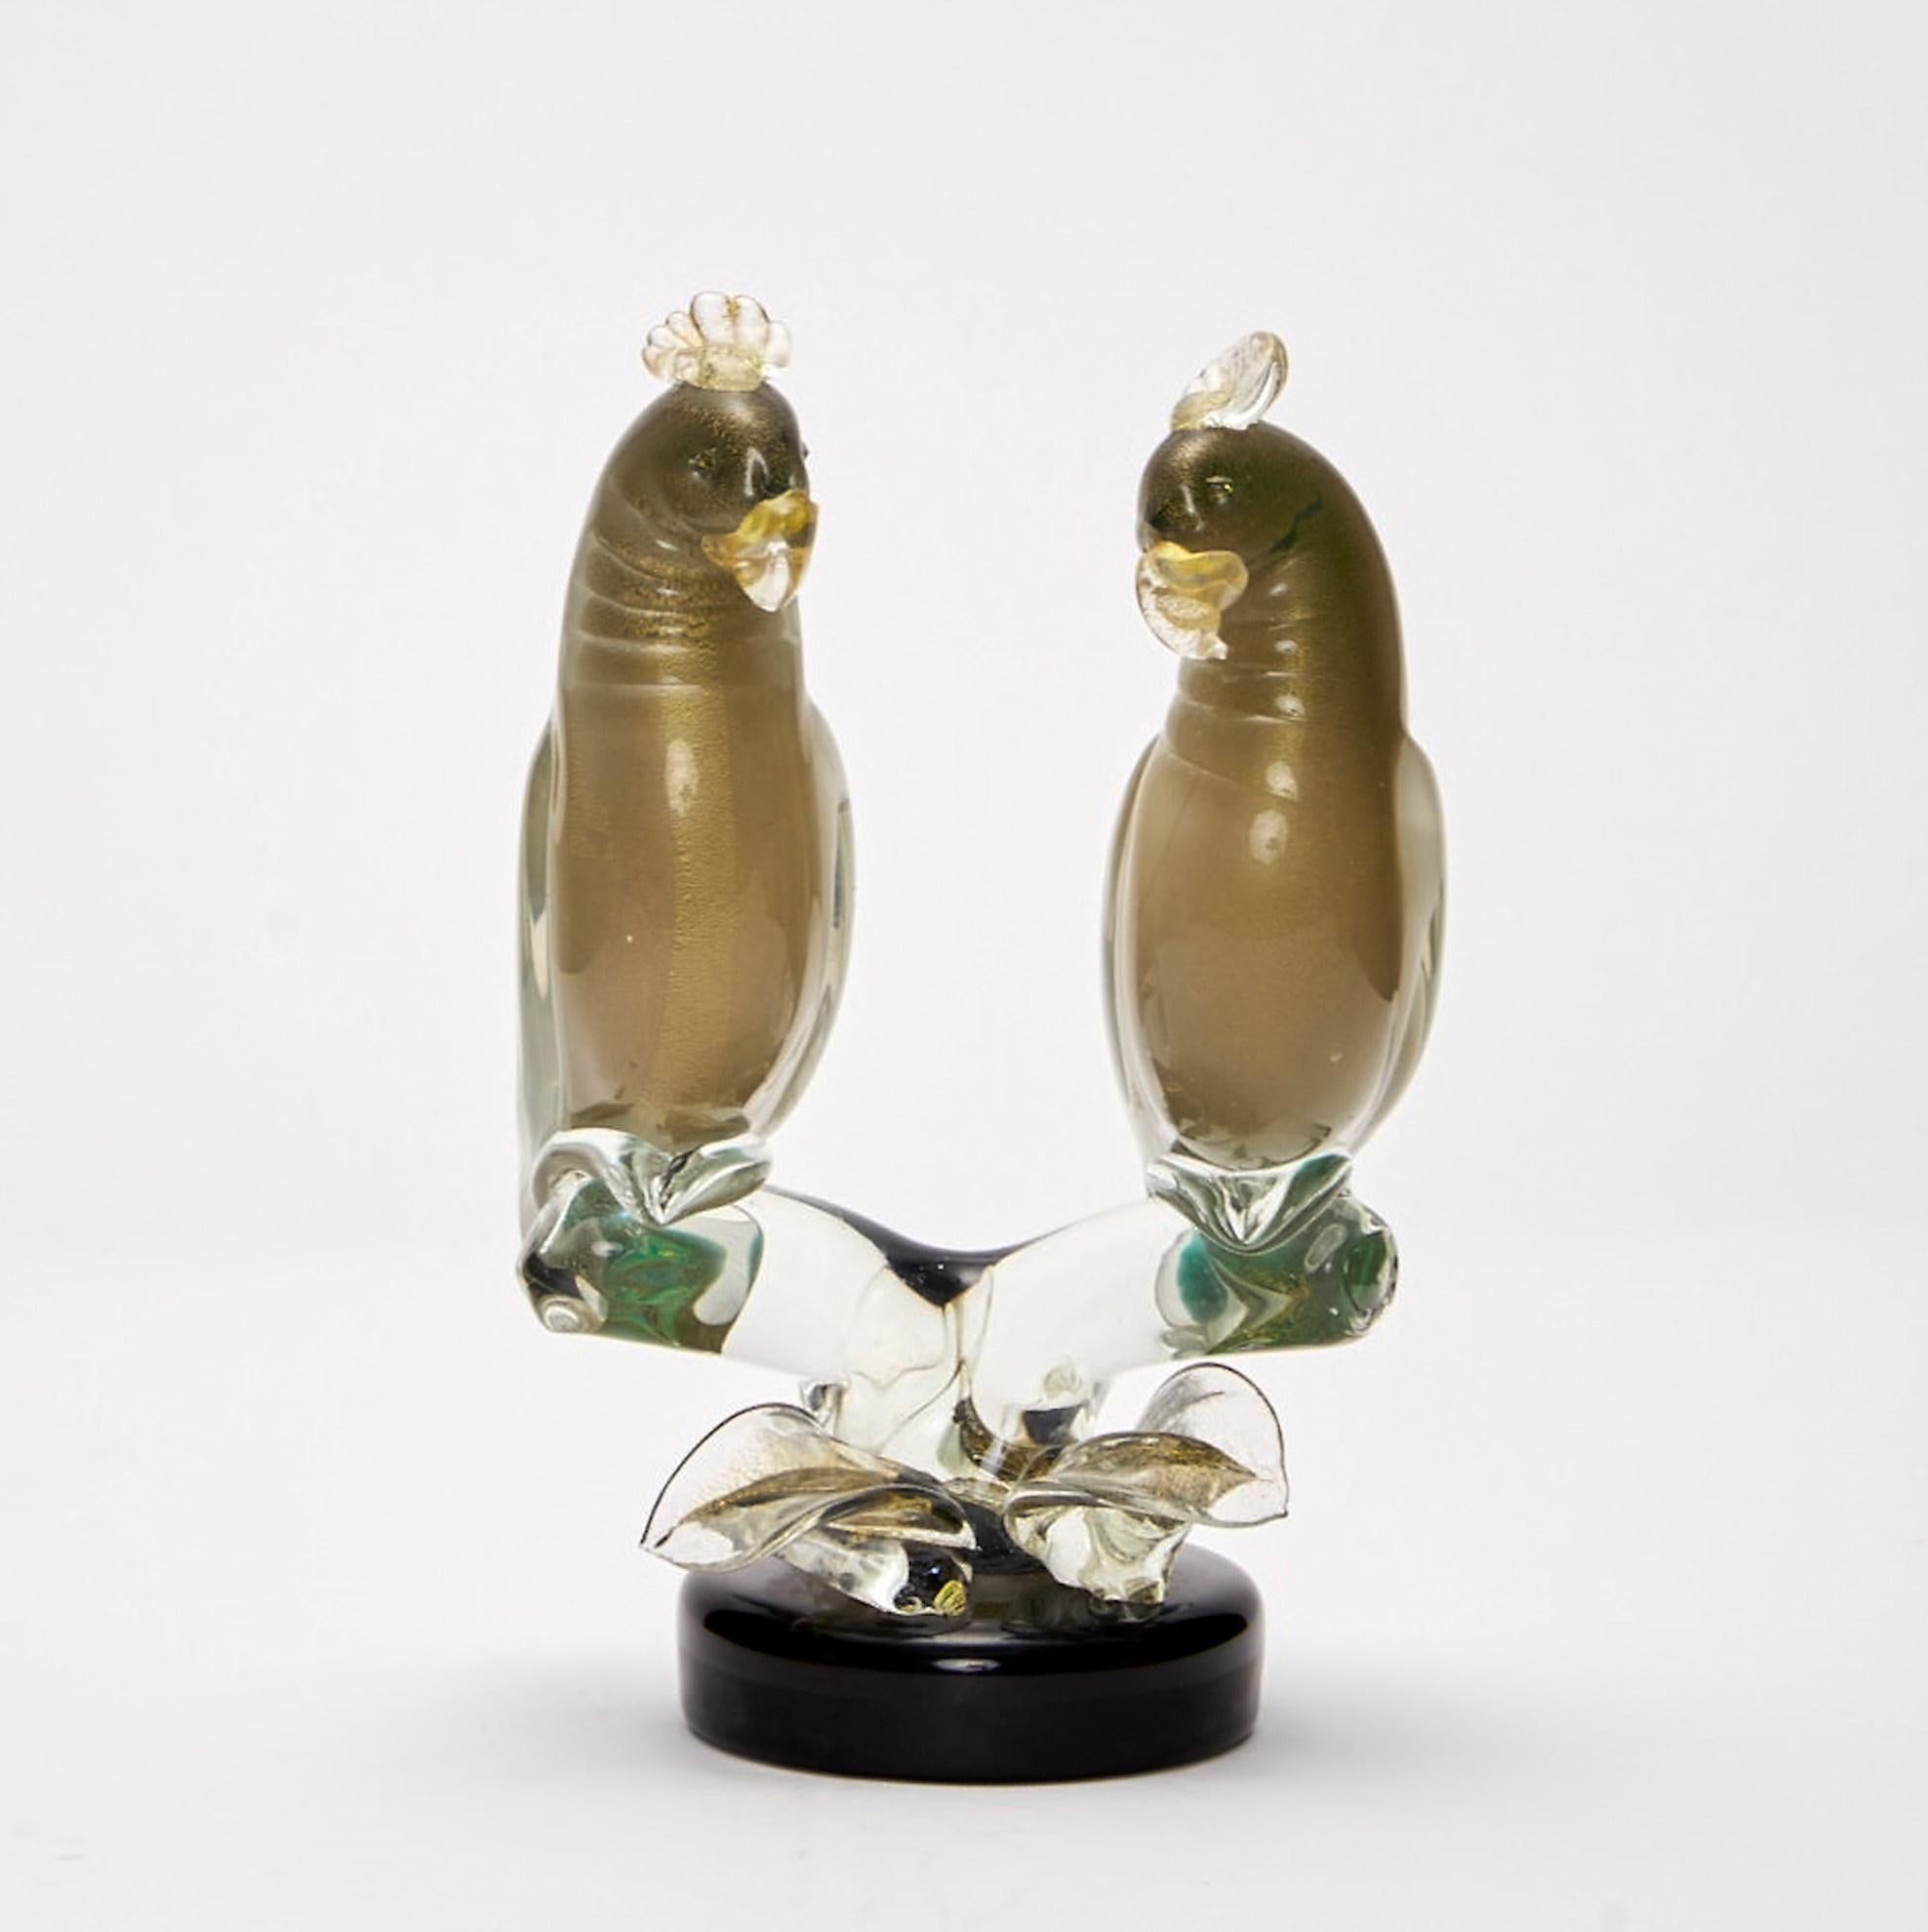 The hand blown Sculpture depicts a pair of parrots poised upon twisted branches. The artist has represented the birds in an opaque dark brown glass decorated internally with gold inclusions and then encased in translucent applied glass. The